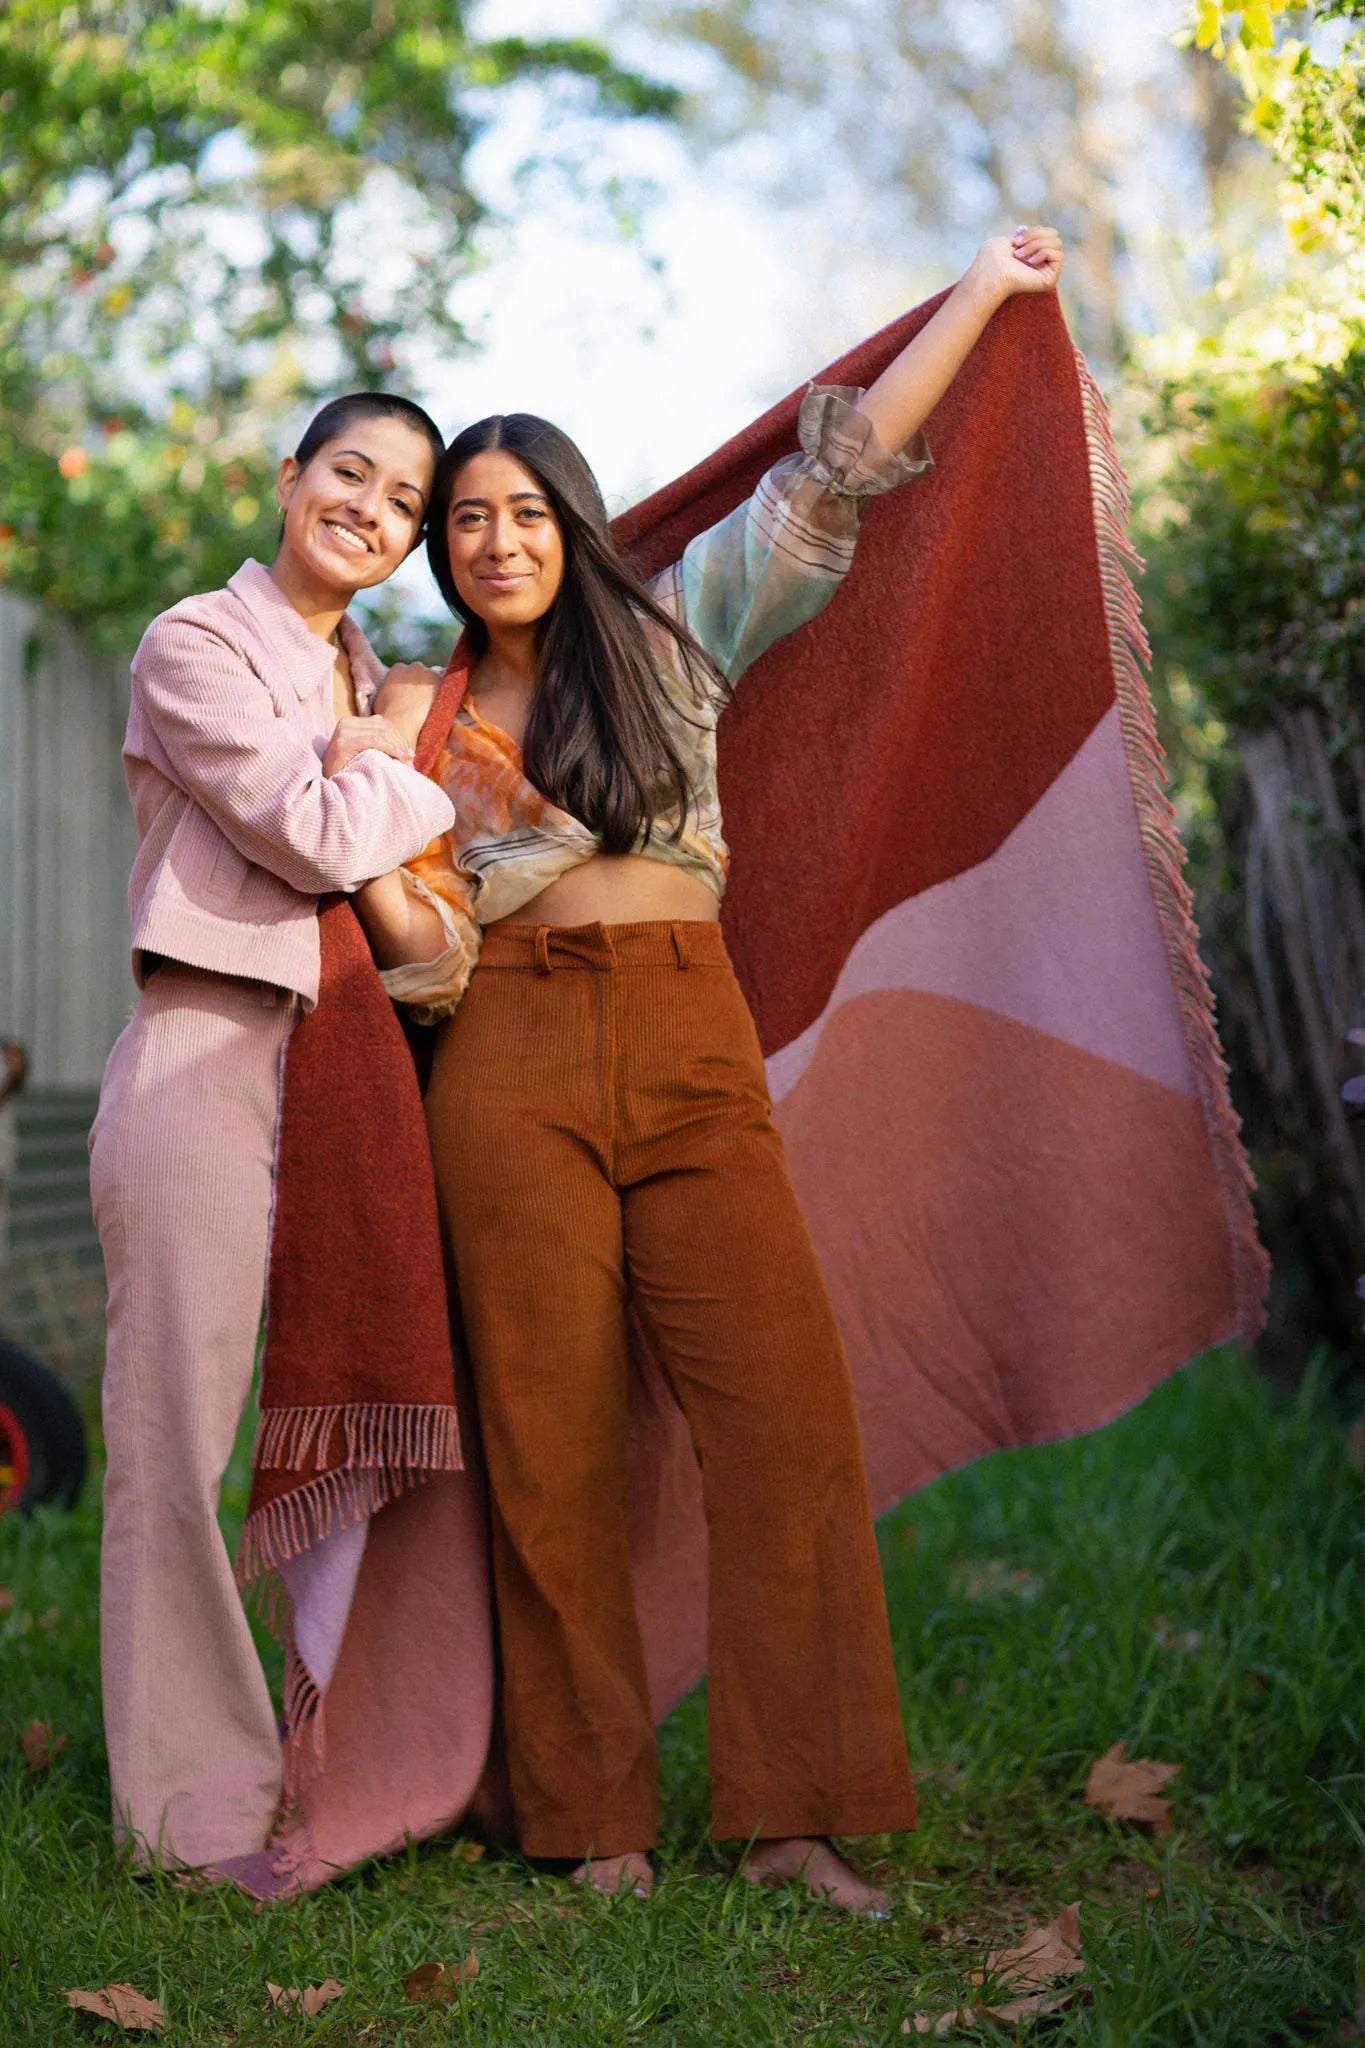 Two women showing a red and pink wool blanket.